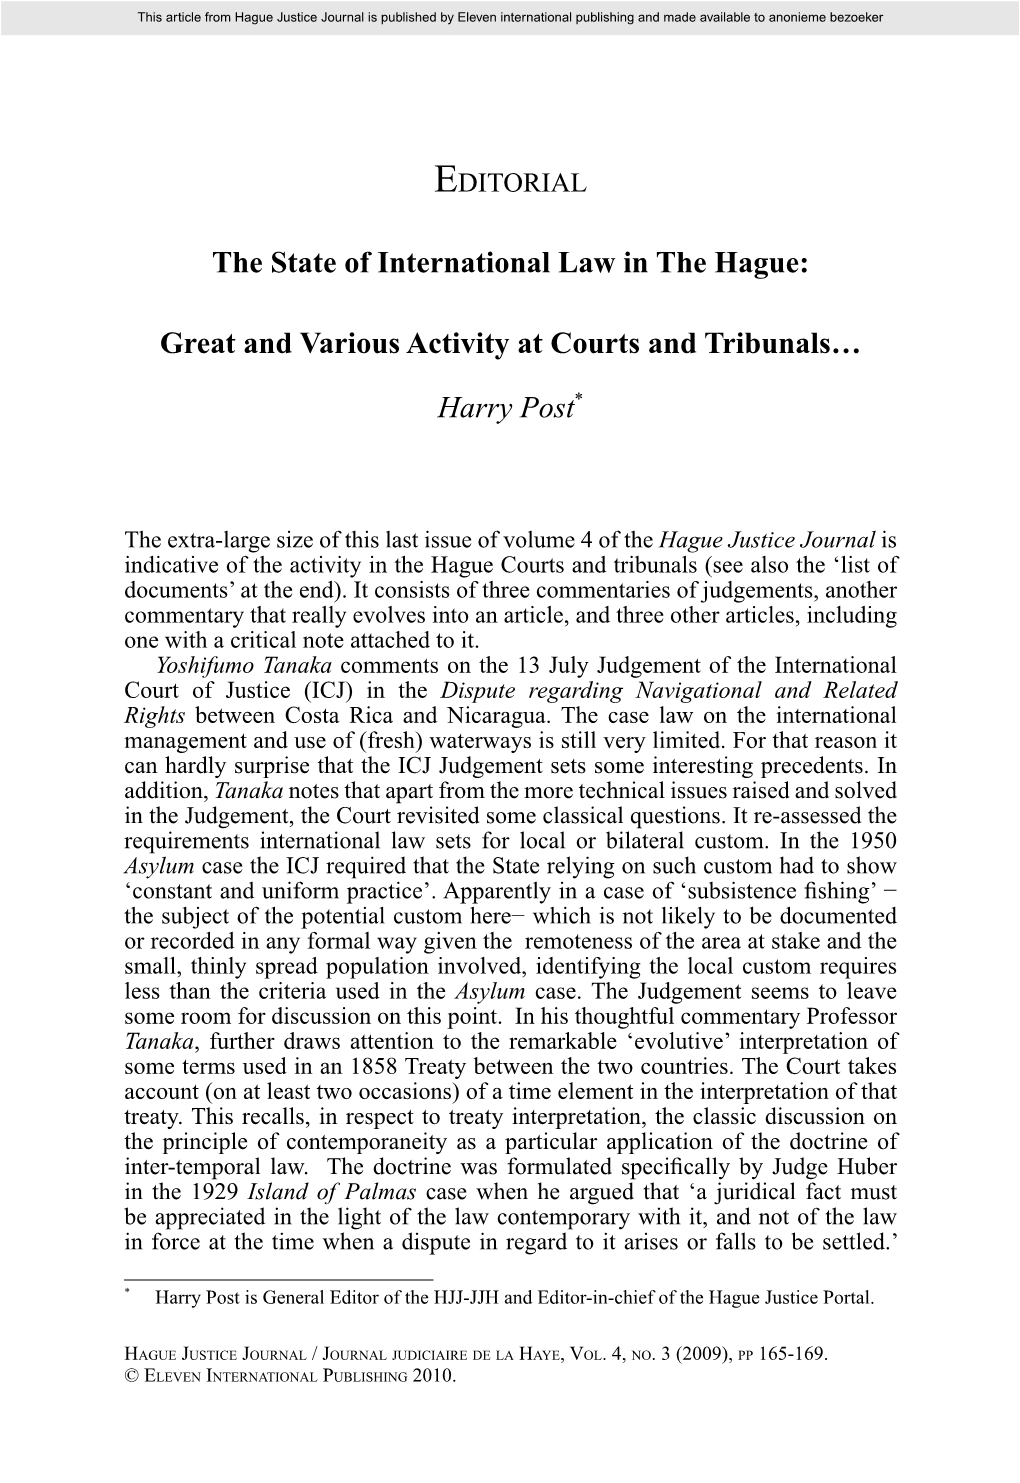 The State of International Law in the Hague